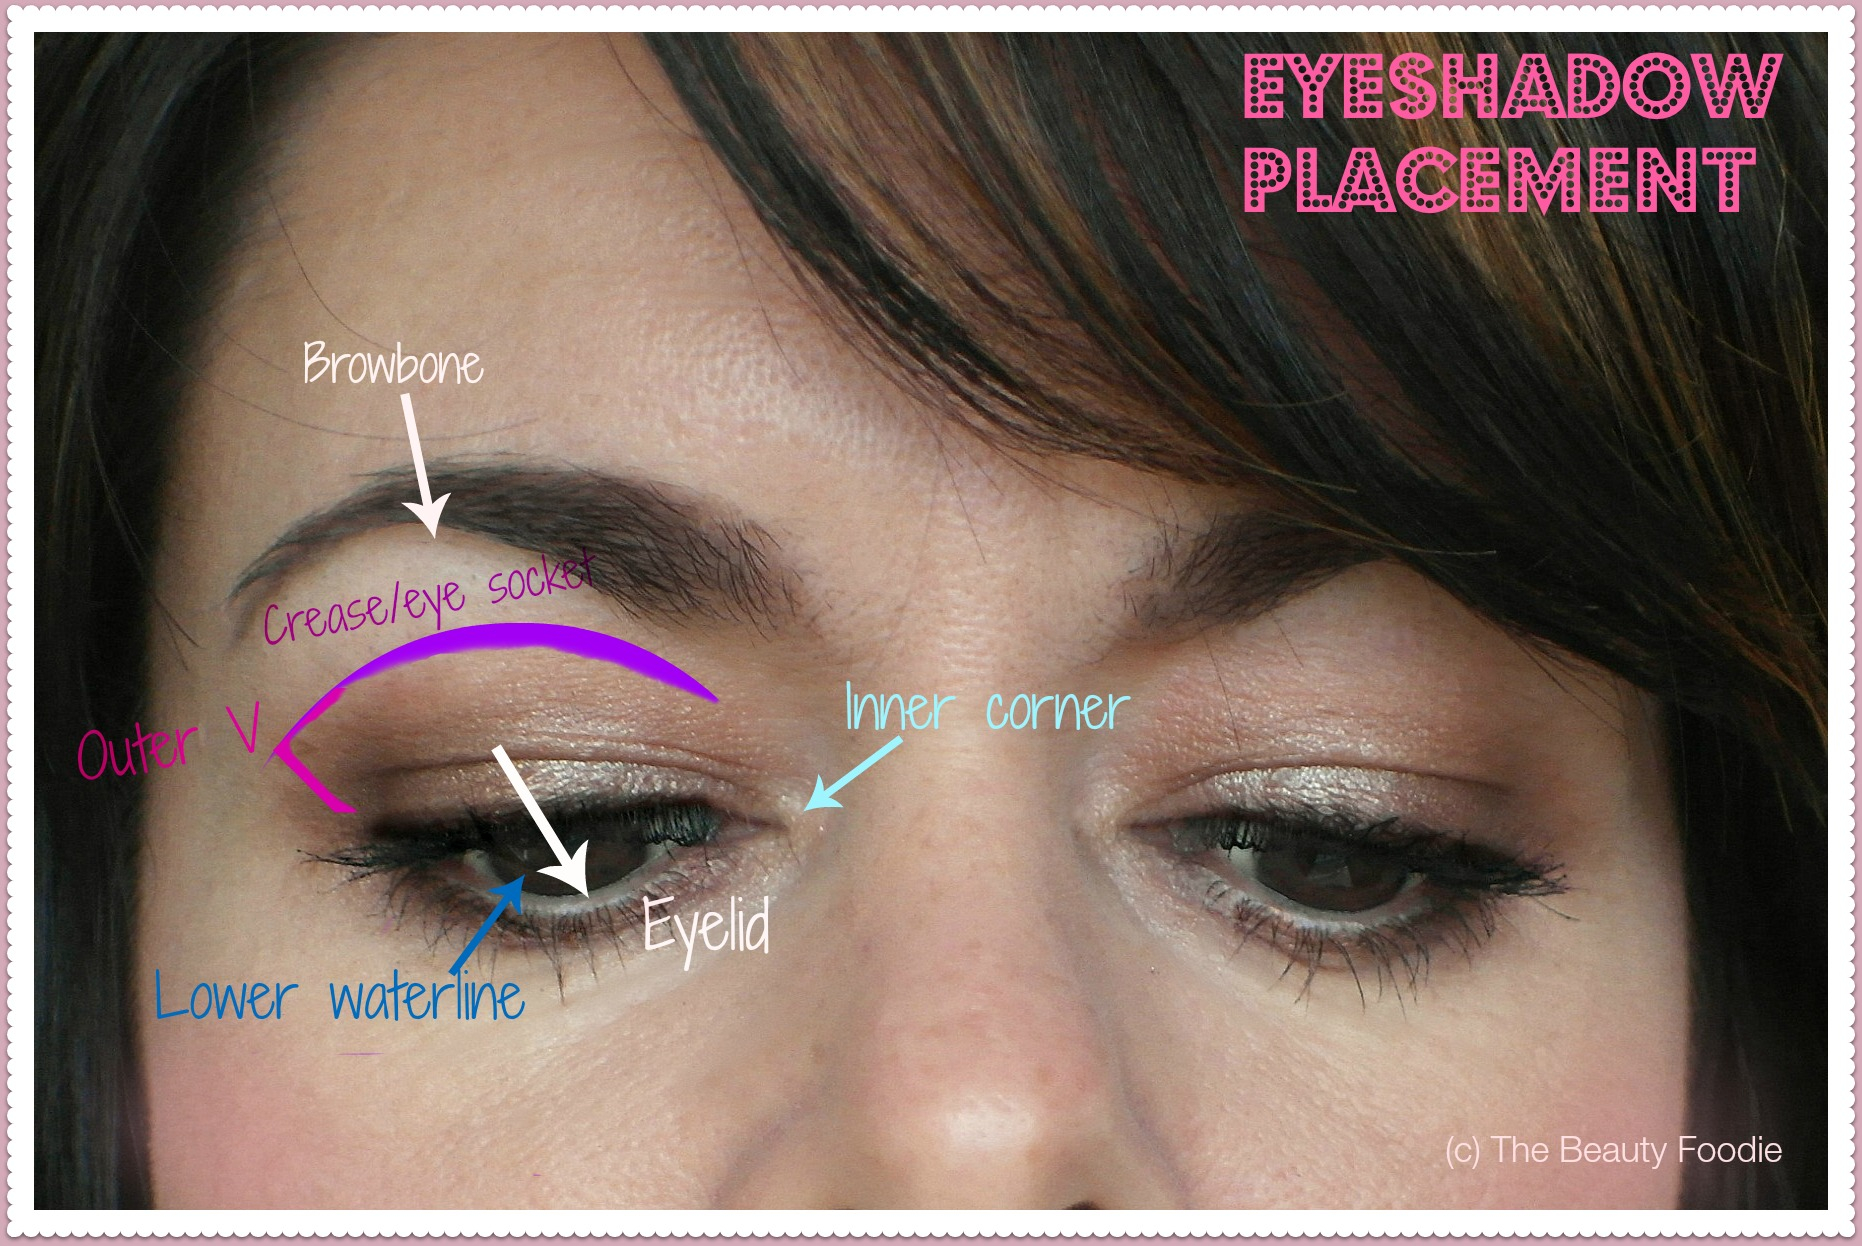 How To Apply Eye Makeup With Pictures Eyeshadow Placement Where Do I Apply It The Beauty Foodie